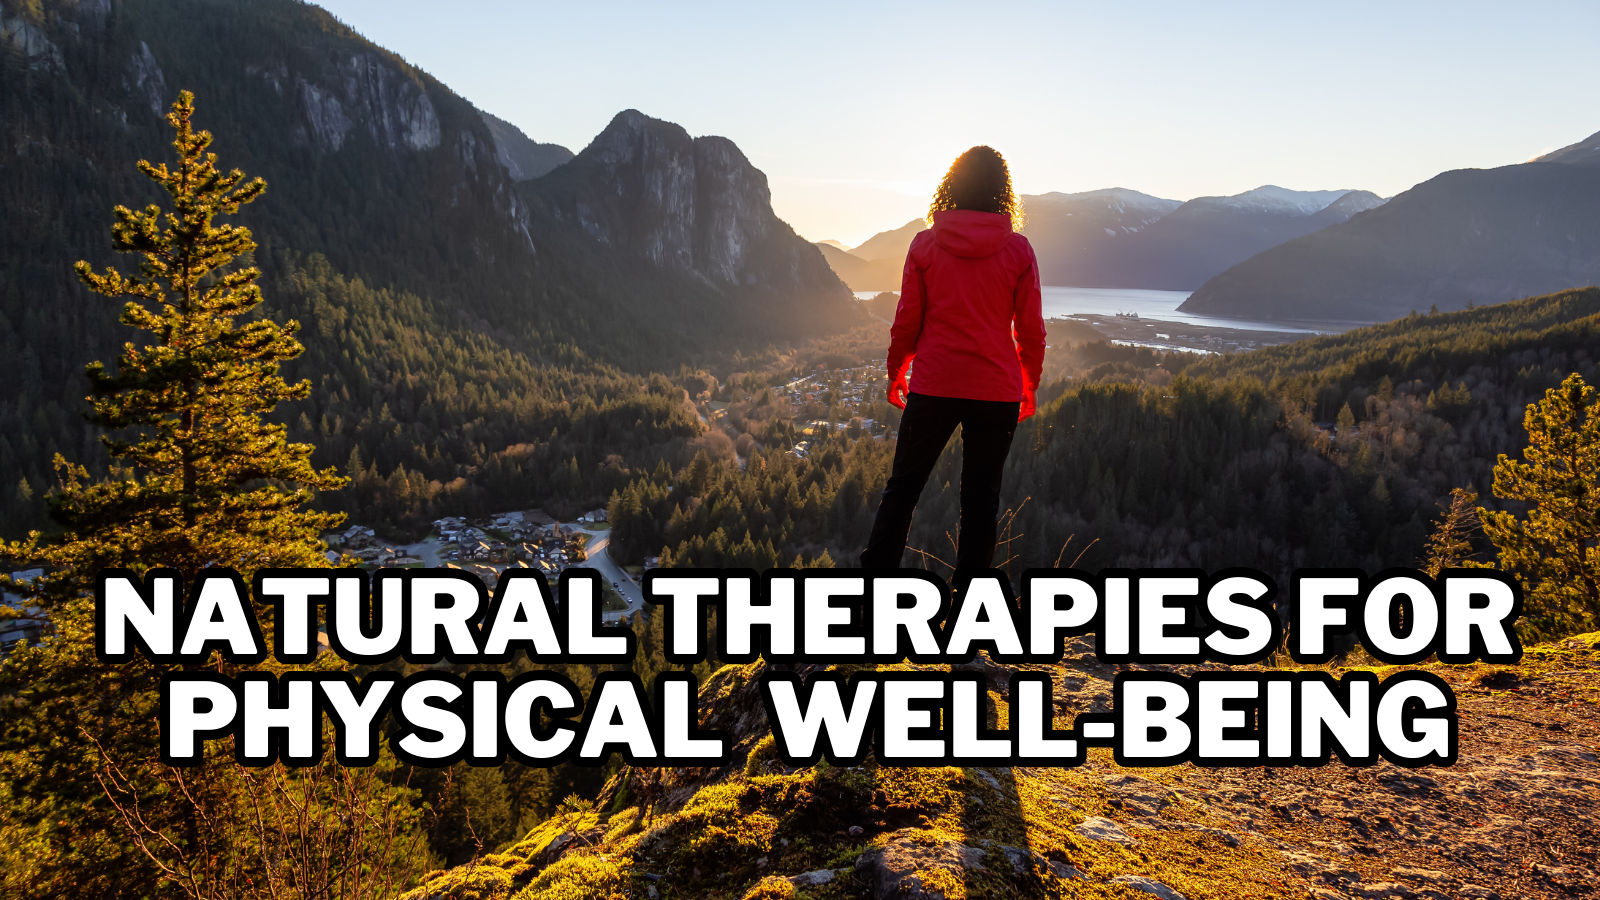 Best Natural Therapies For Physical Well-Being